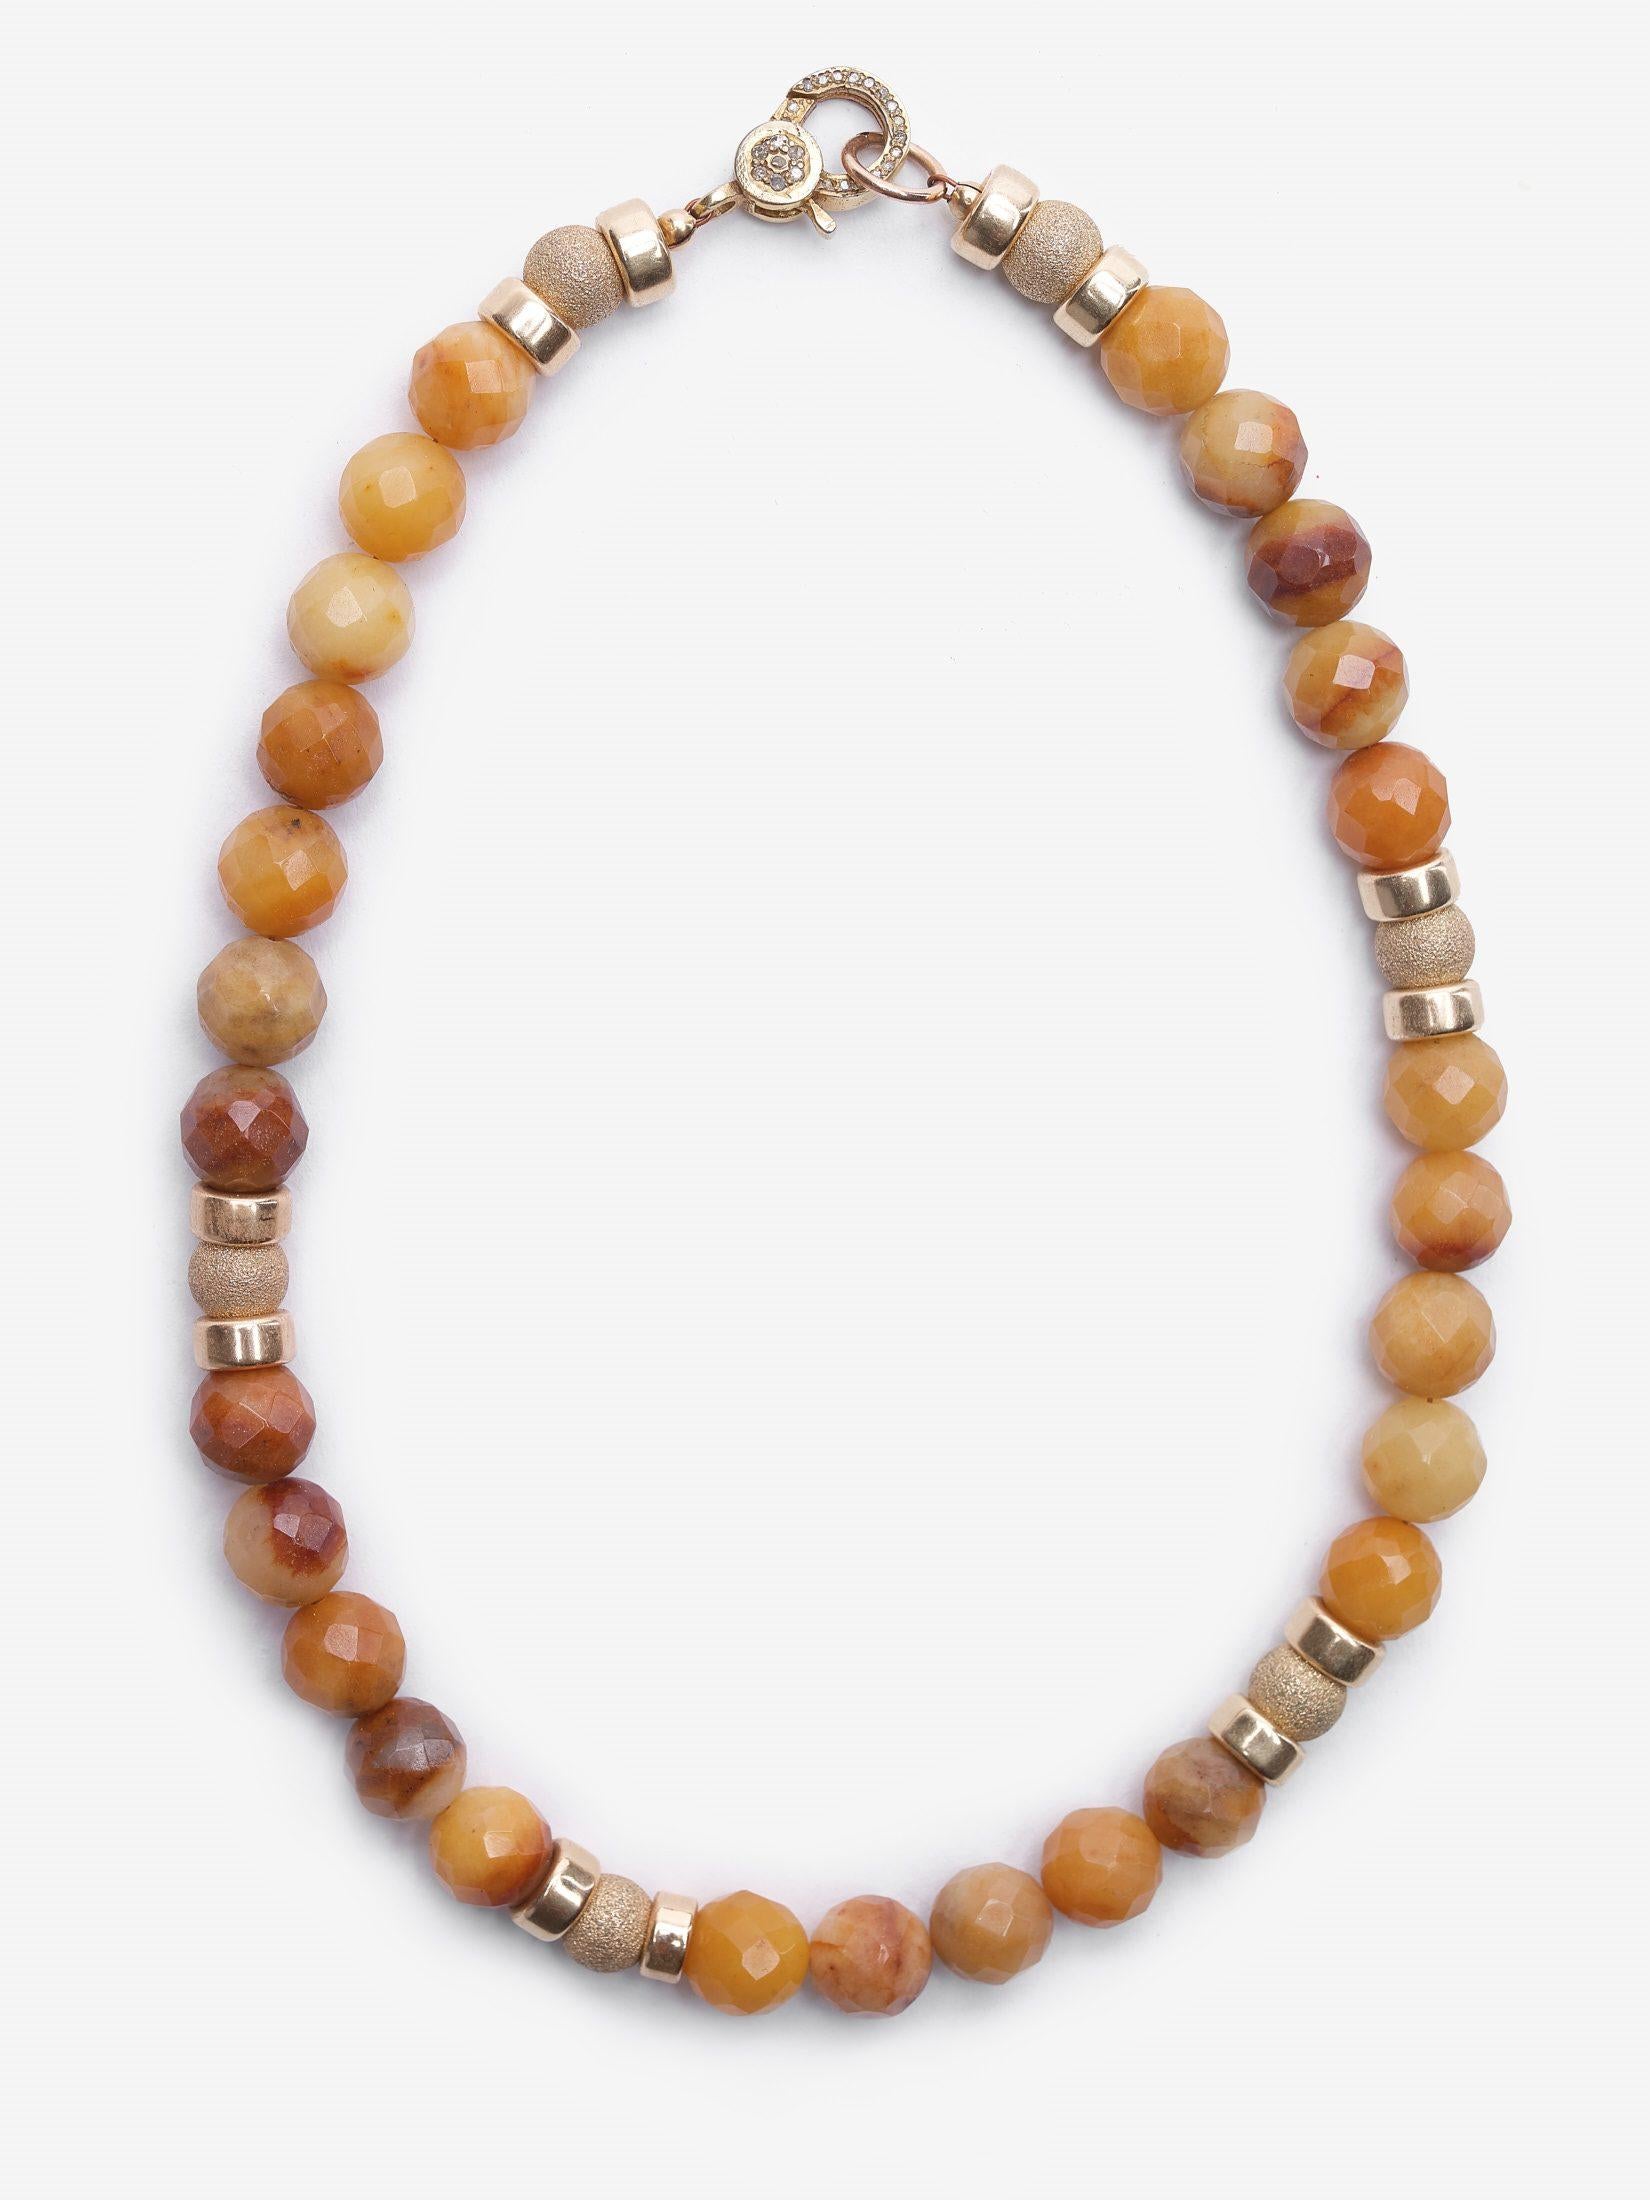 Story Behind the Jewelry
The exquisite combination of jade and tiger's eye makes this one of the favorites in the Jada Jo collection. The double style choker is designed with a tiger's eye buddha and adorned with 14K gold filled pavé